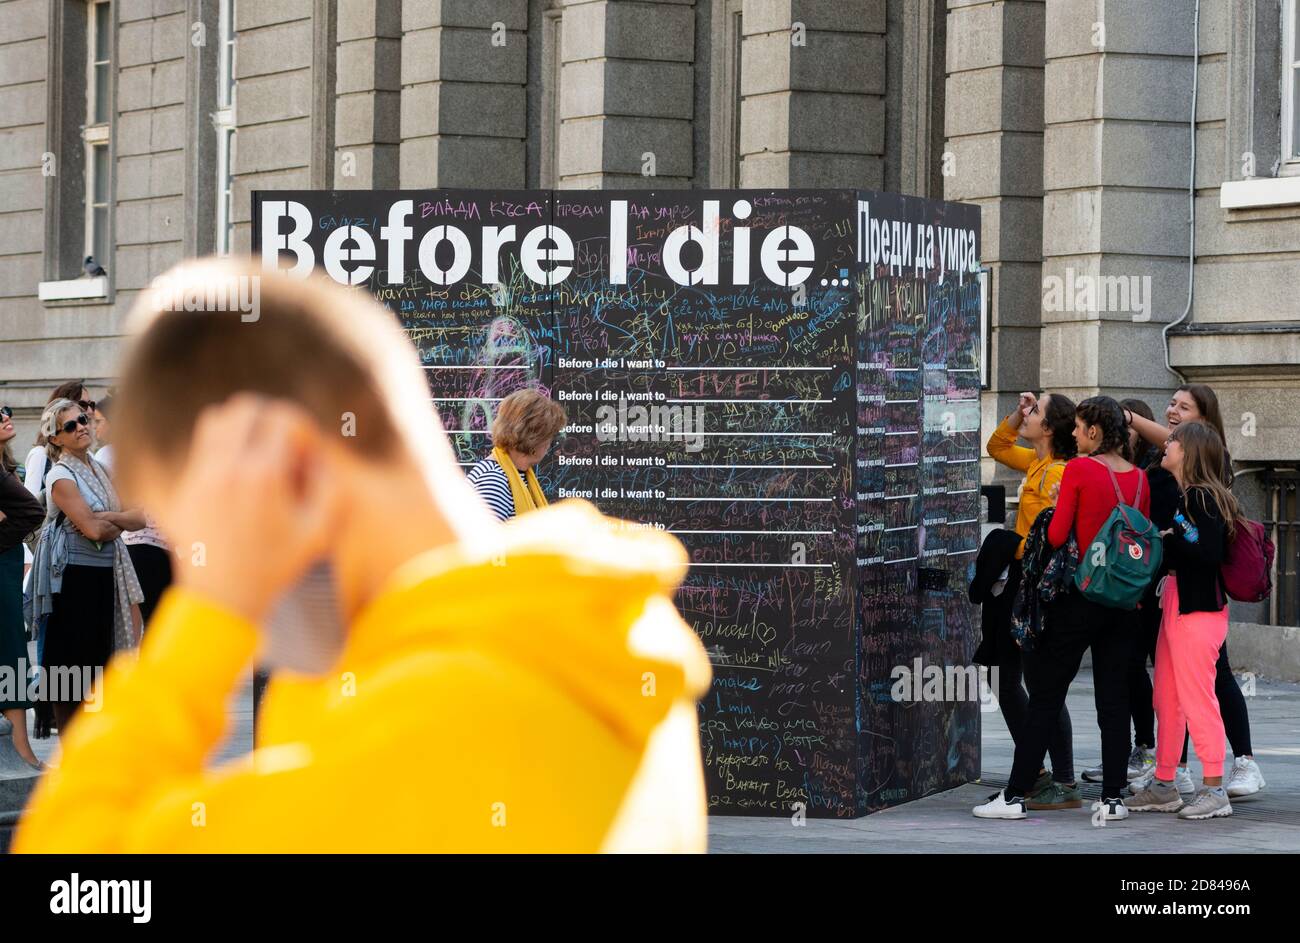 Passersby writing and reading messages on a blackboard or chalkboard wall for the Before I Die public interactive art project in Sofia Bulgaria Stock Photo